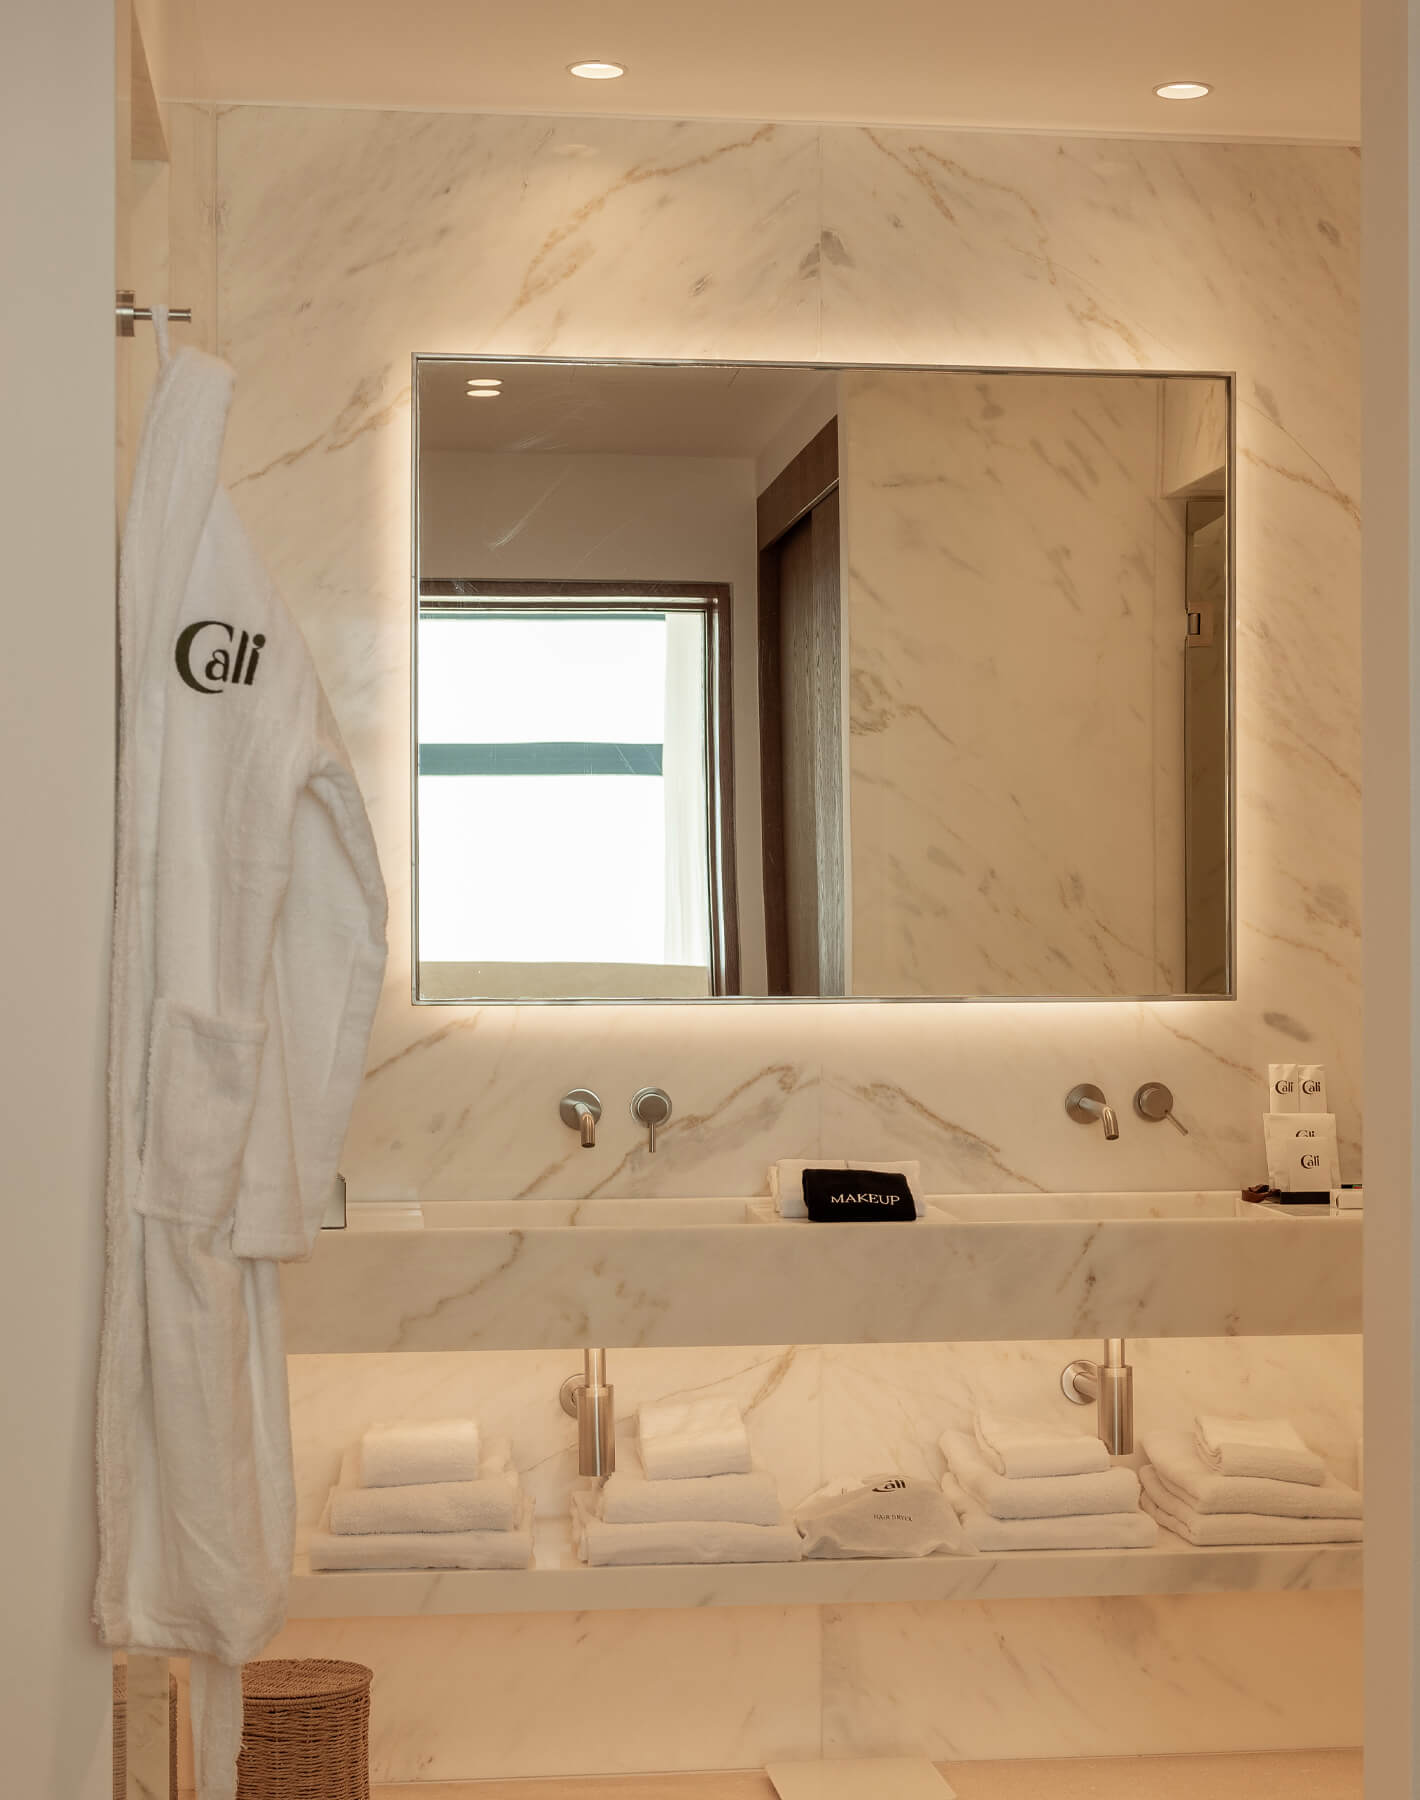 Indulge in the opulent bathroom amenities at Villa Calliope, featuring high-end toiletries, plush towels, and elegant marble finishes, providing a spa-like experience in the comfort of your villa.